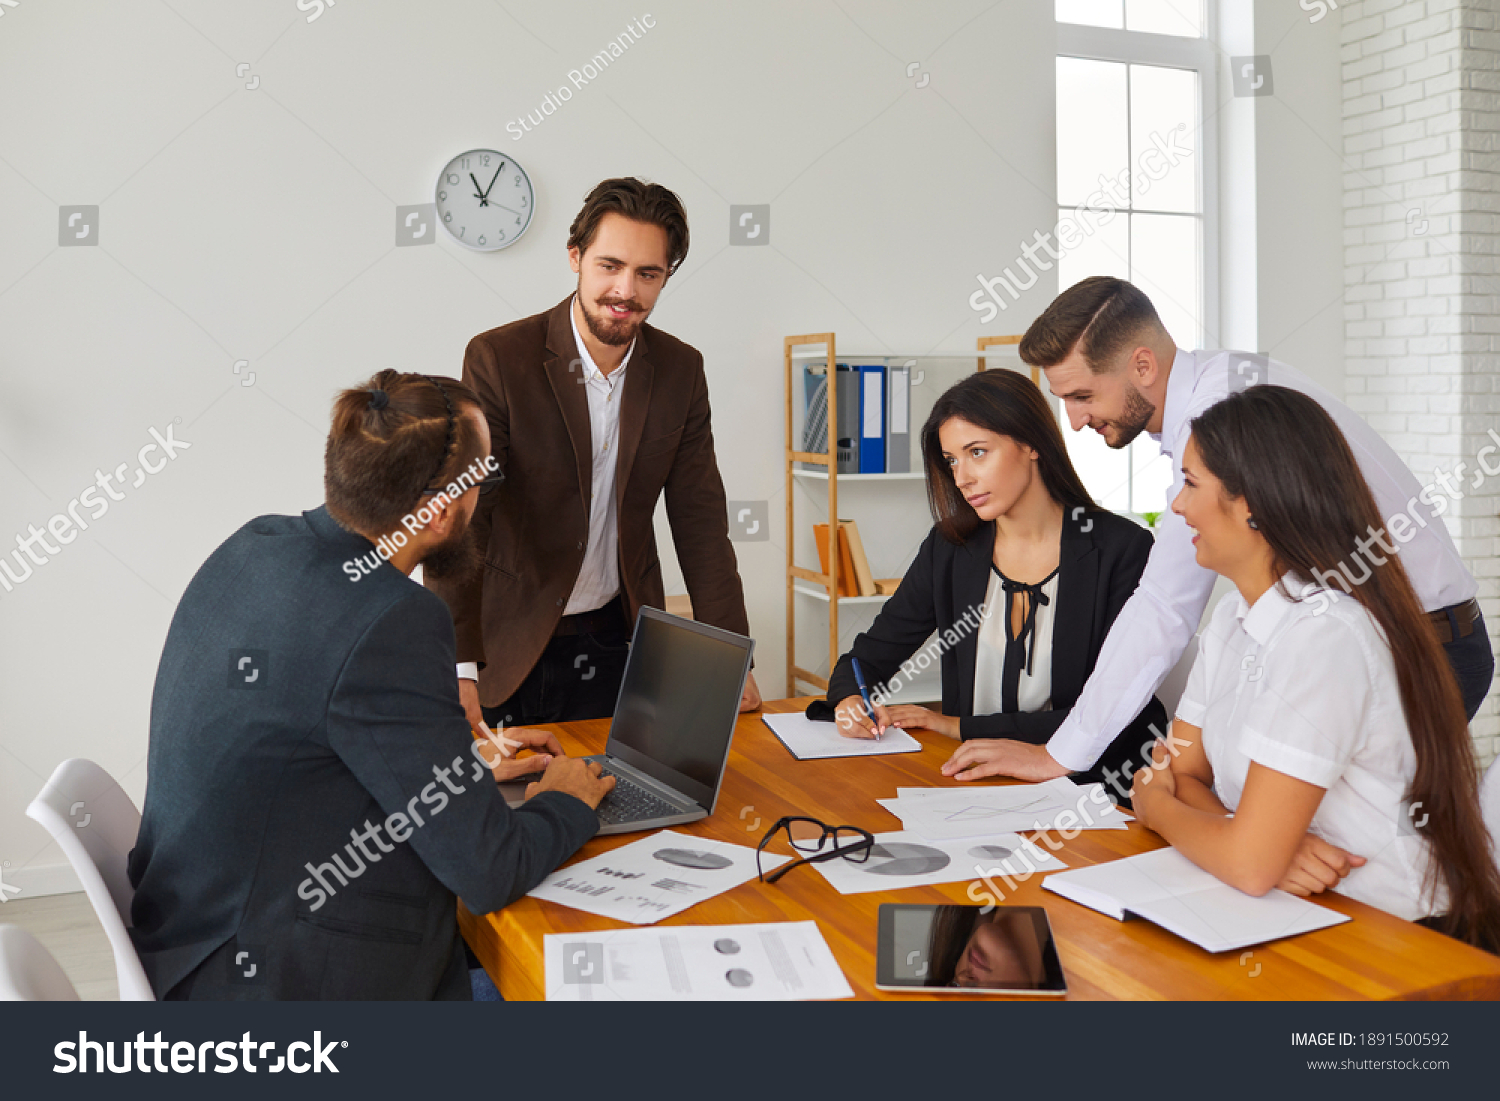 Startup group meeting around office desk in creative workspace. Start-up leader listening to teammates' suggestions, talking, discussing budget issues and work needs. Sales team analyzing results #1891500592